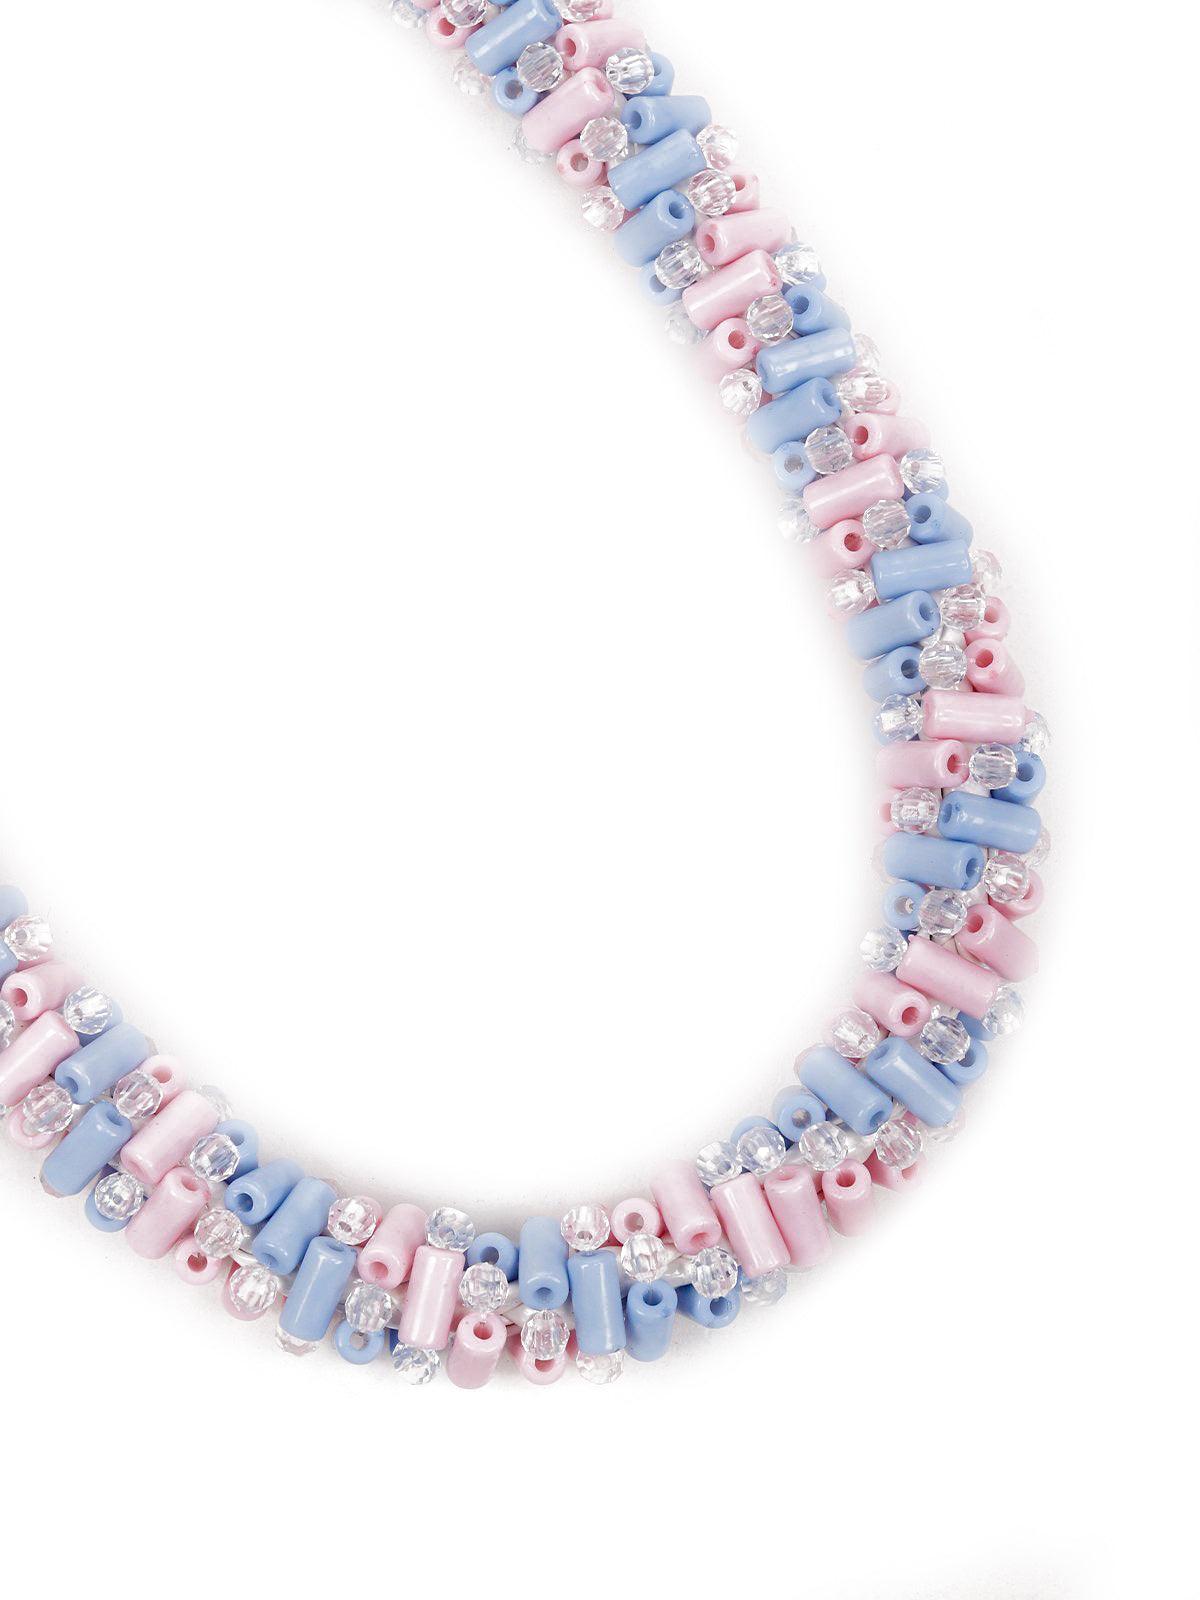 Candy Sky Blue And Baby Pink Necklace - Odette